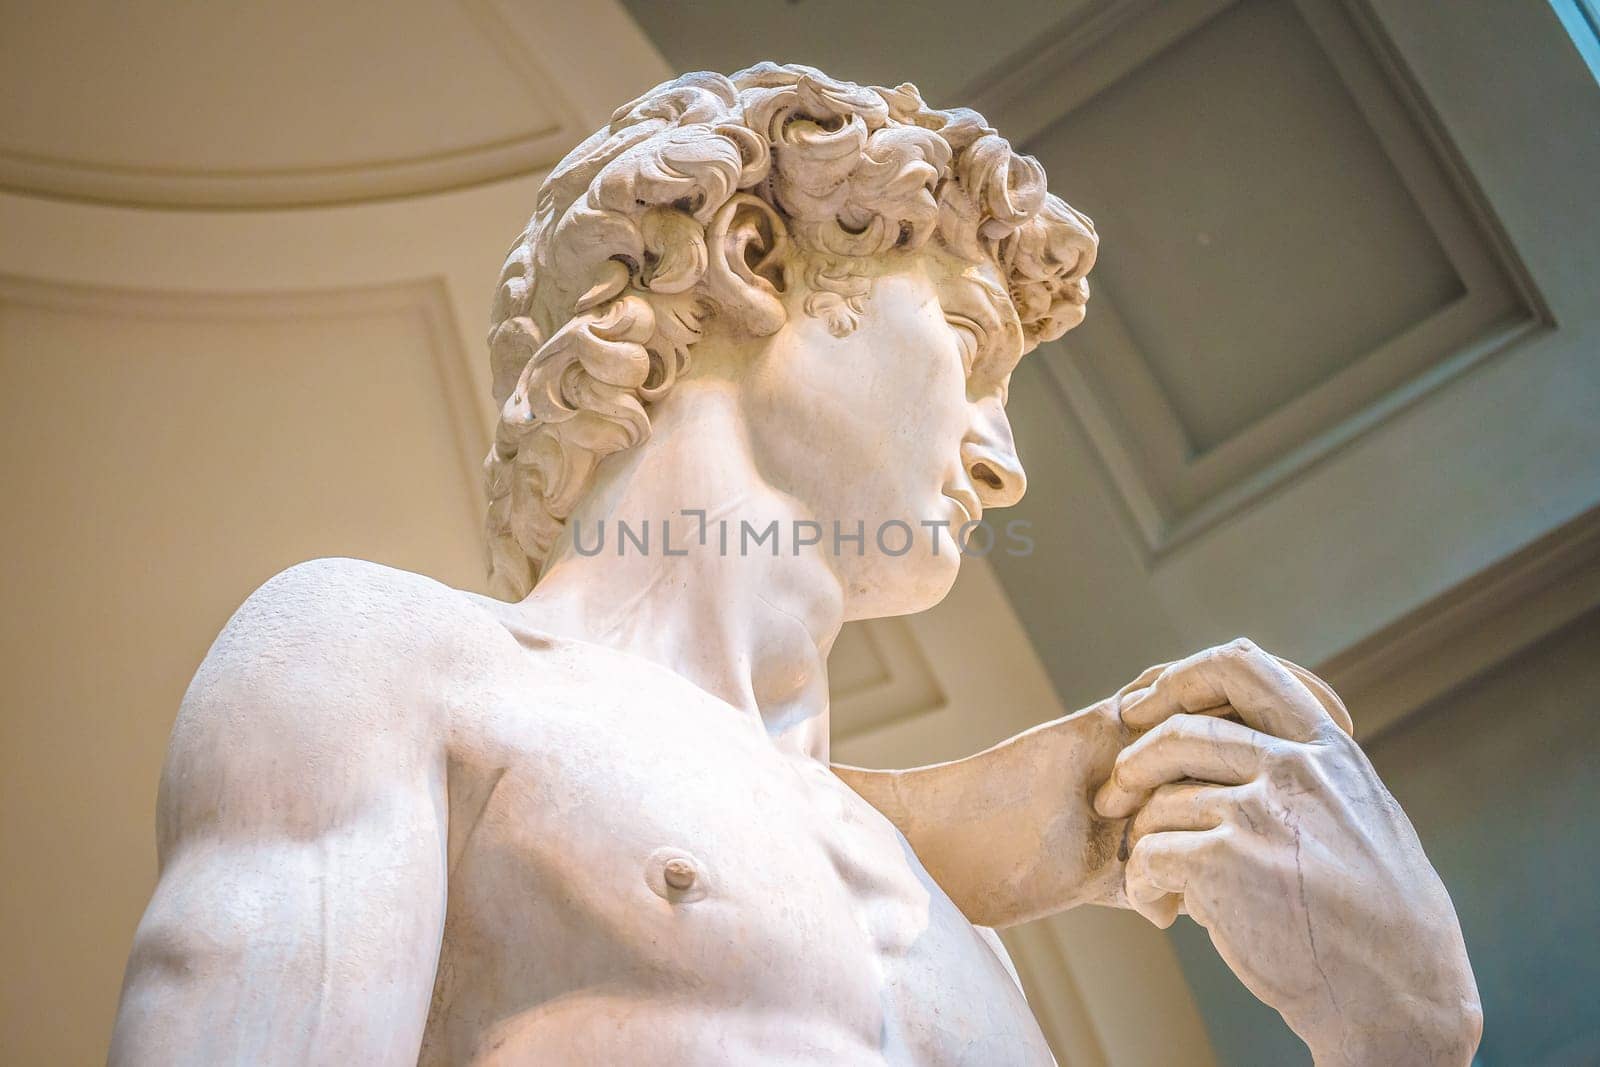 Florence, Tuscany, Italy July 18 2018: Head detail of Statue of David, completed by Michelangelo Buonarroti in 1504, is one of the most renowned works of the Renaissance, and most famous sculpture in the world. Original statue situated in Florence Accademia in Italy